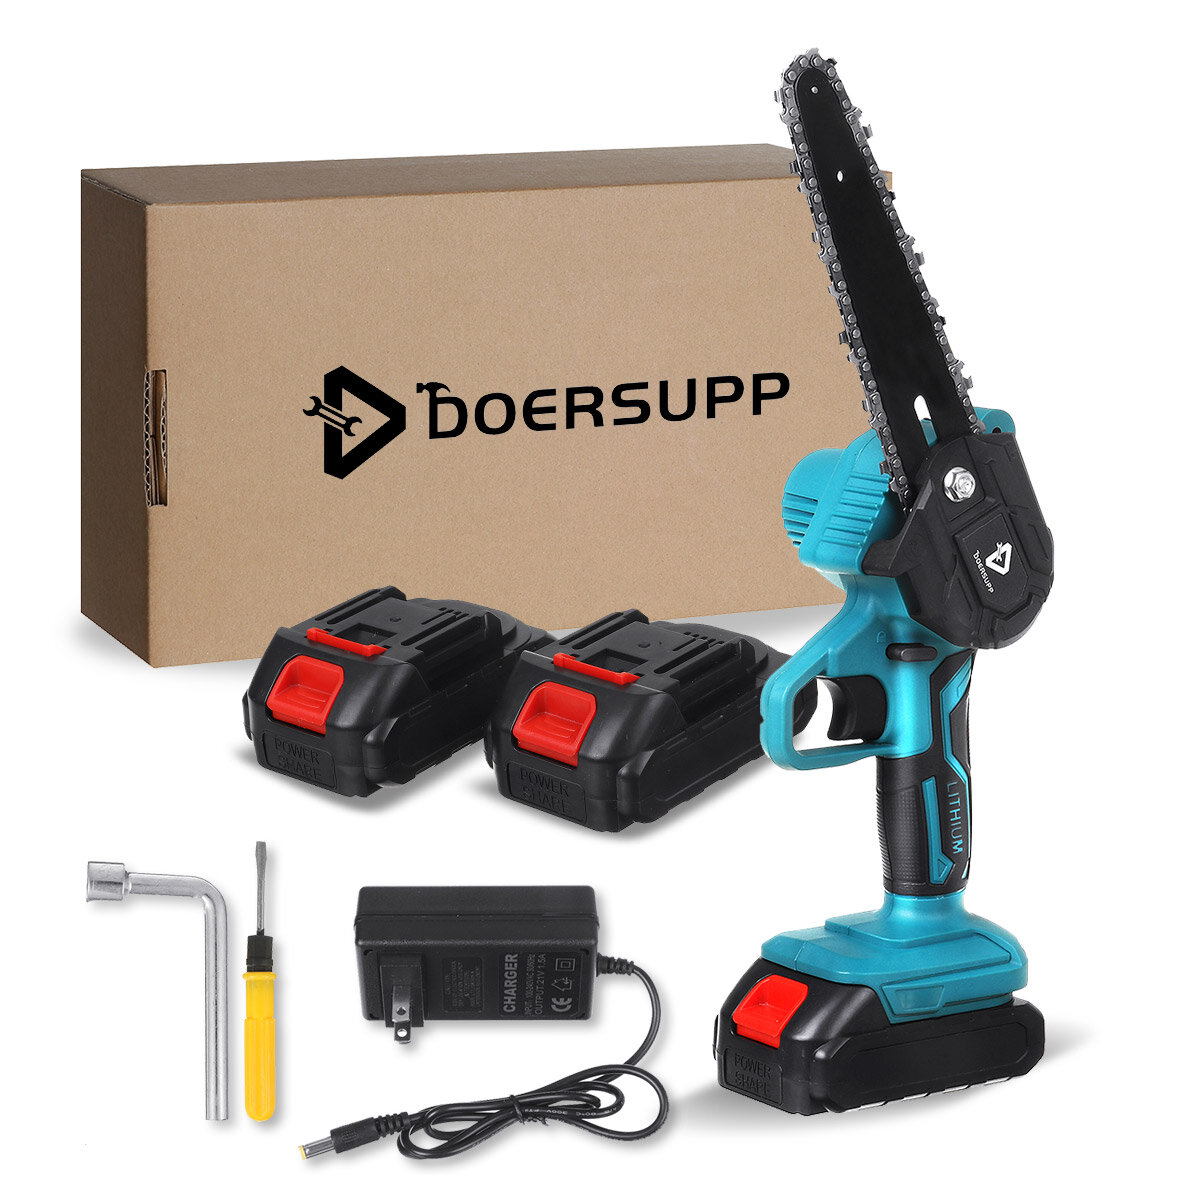 Image of DOERSUPP 1000W 6Inch One Hand Cordless Electric Chain Saw Wood Mini Cutter Saw Woodworking W/1 or 2 Battery For Makita18